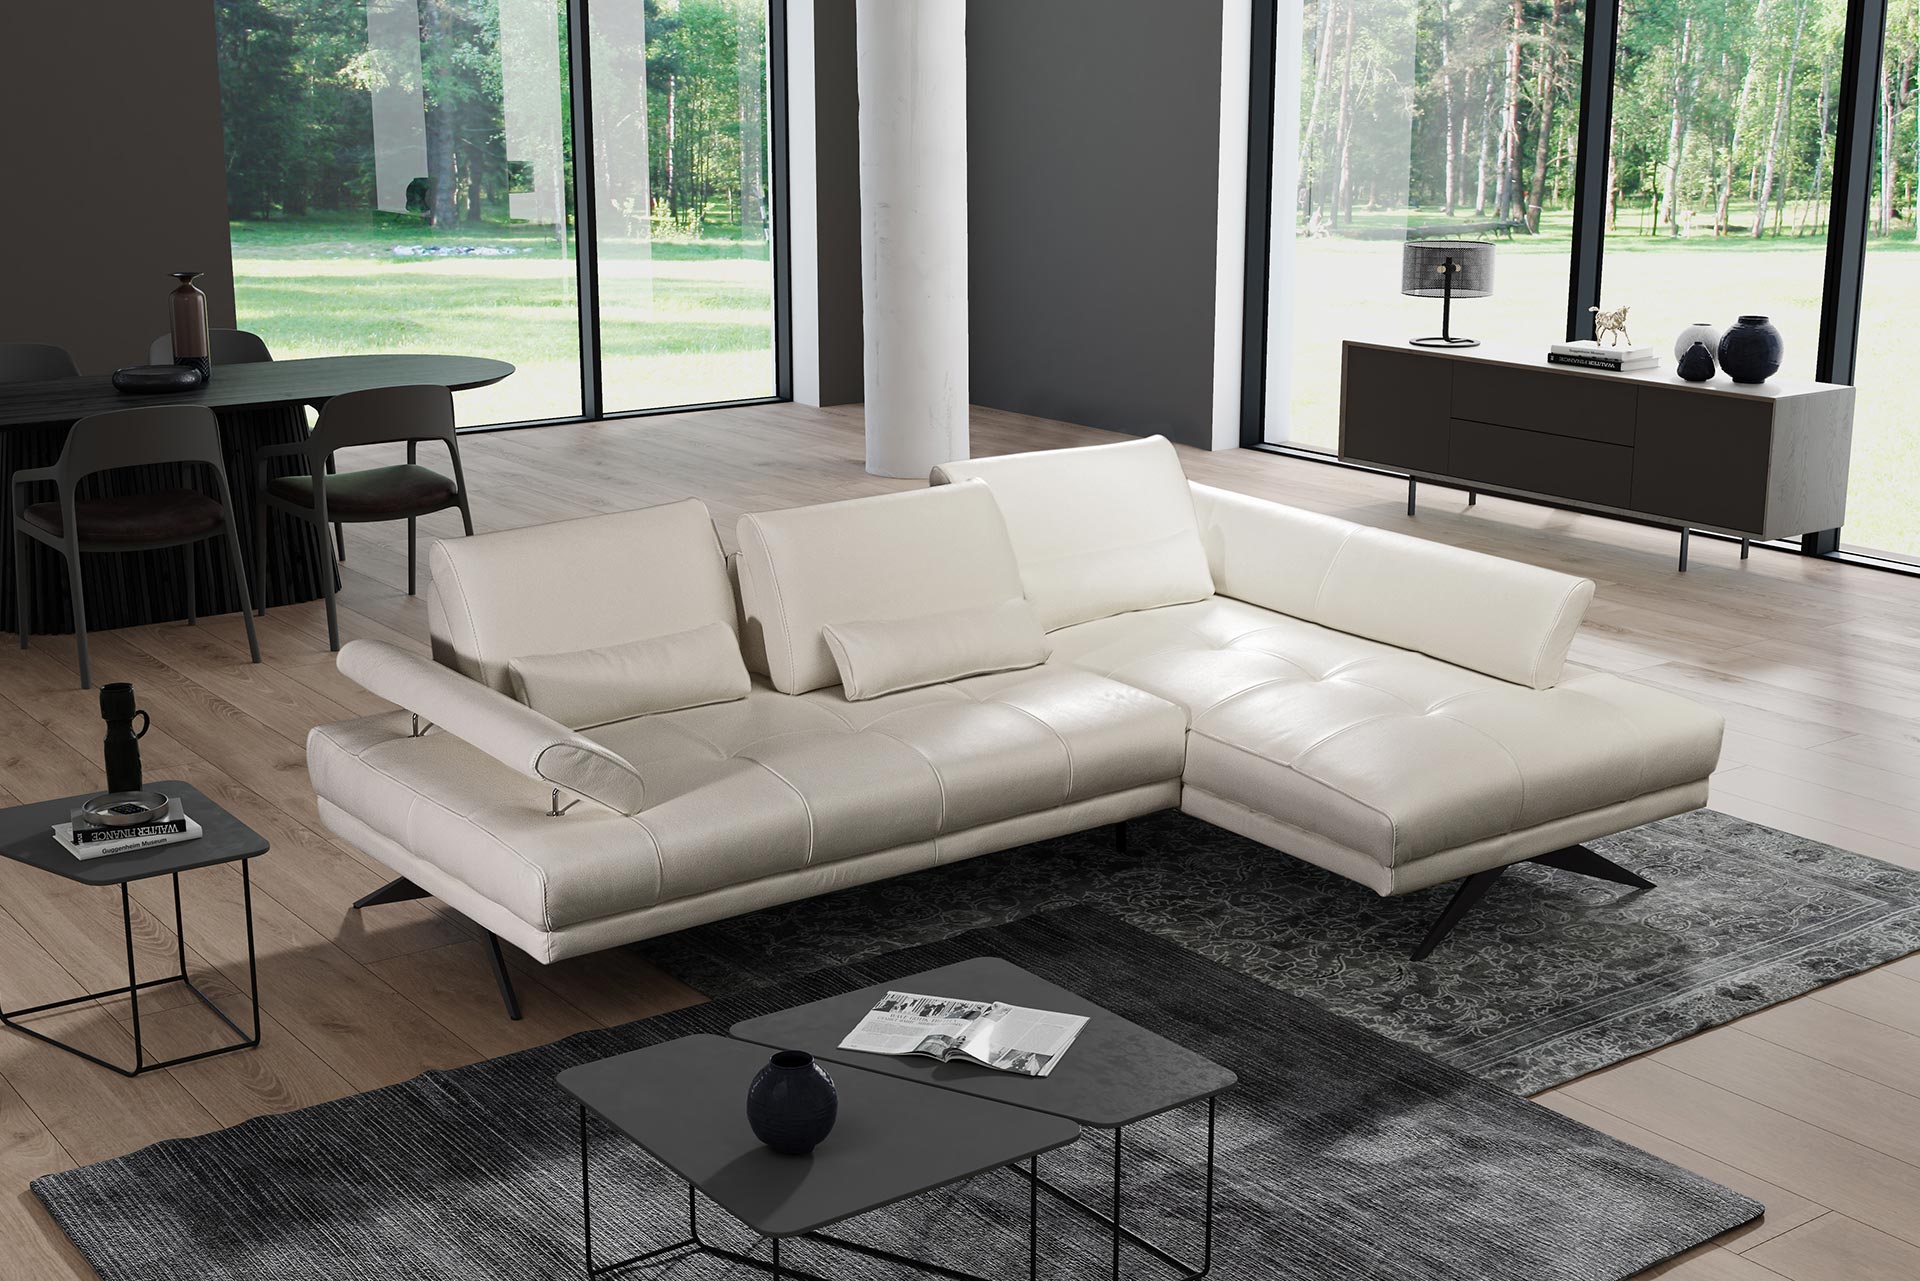 How to choose the right sofa for your living space. - get inspired by Smart Furniture online store